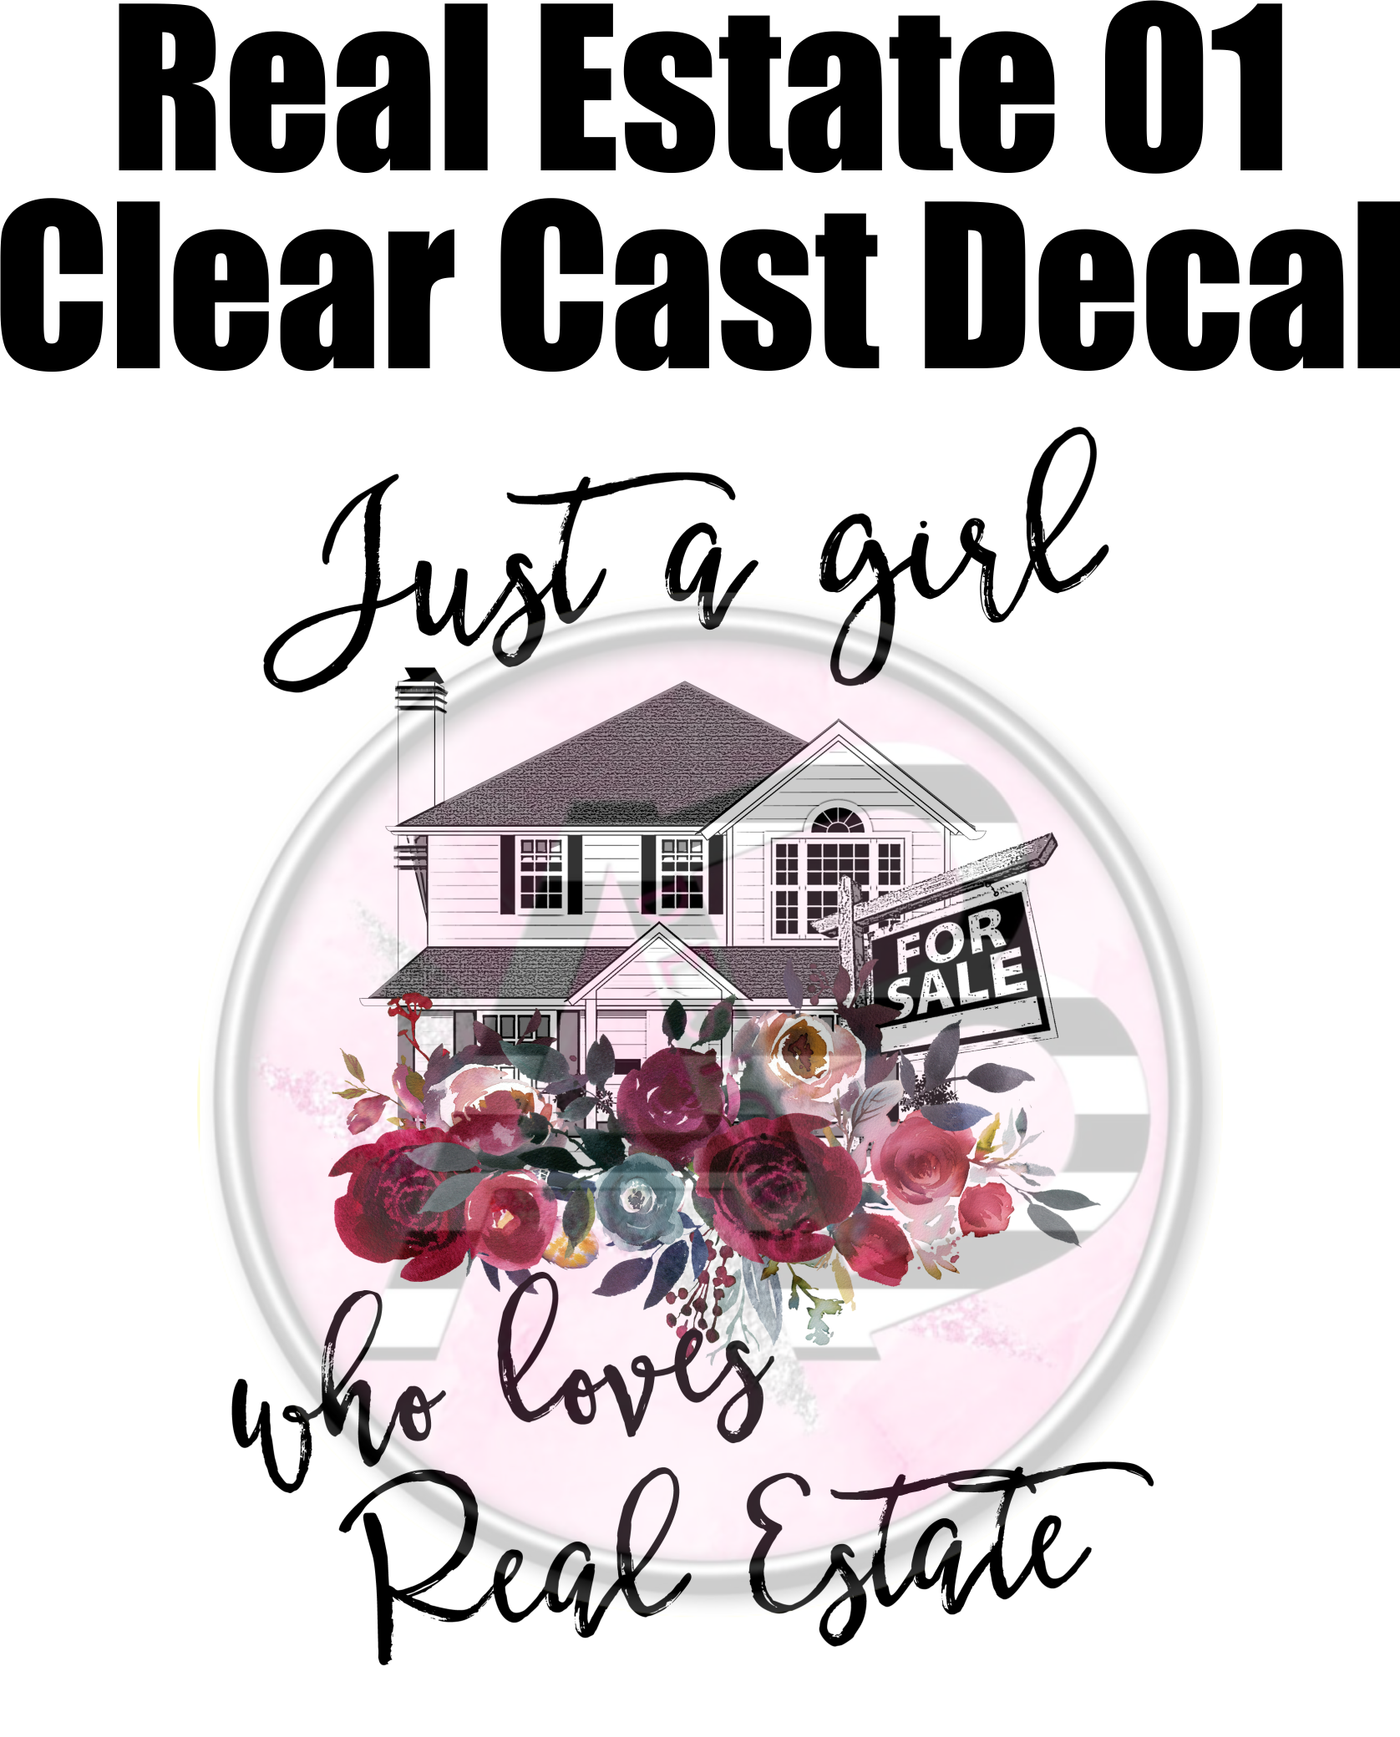 Real Estate 01 - Clear Cast Decal